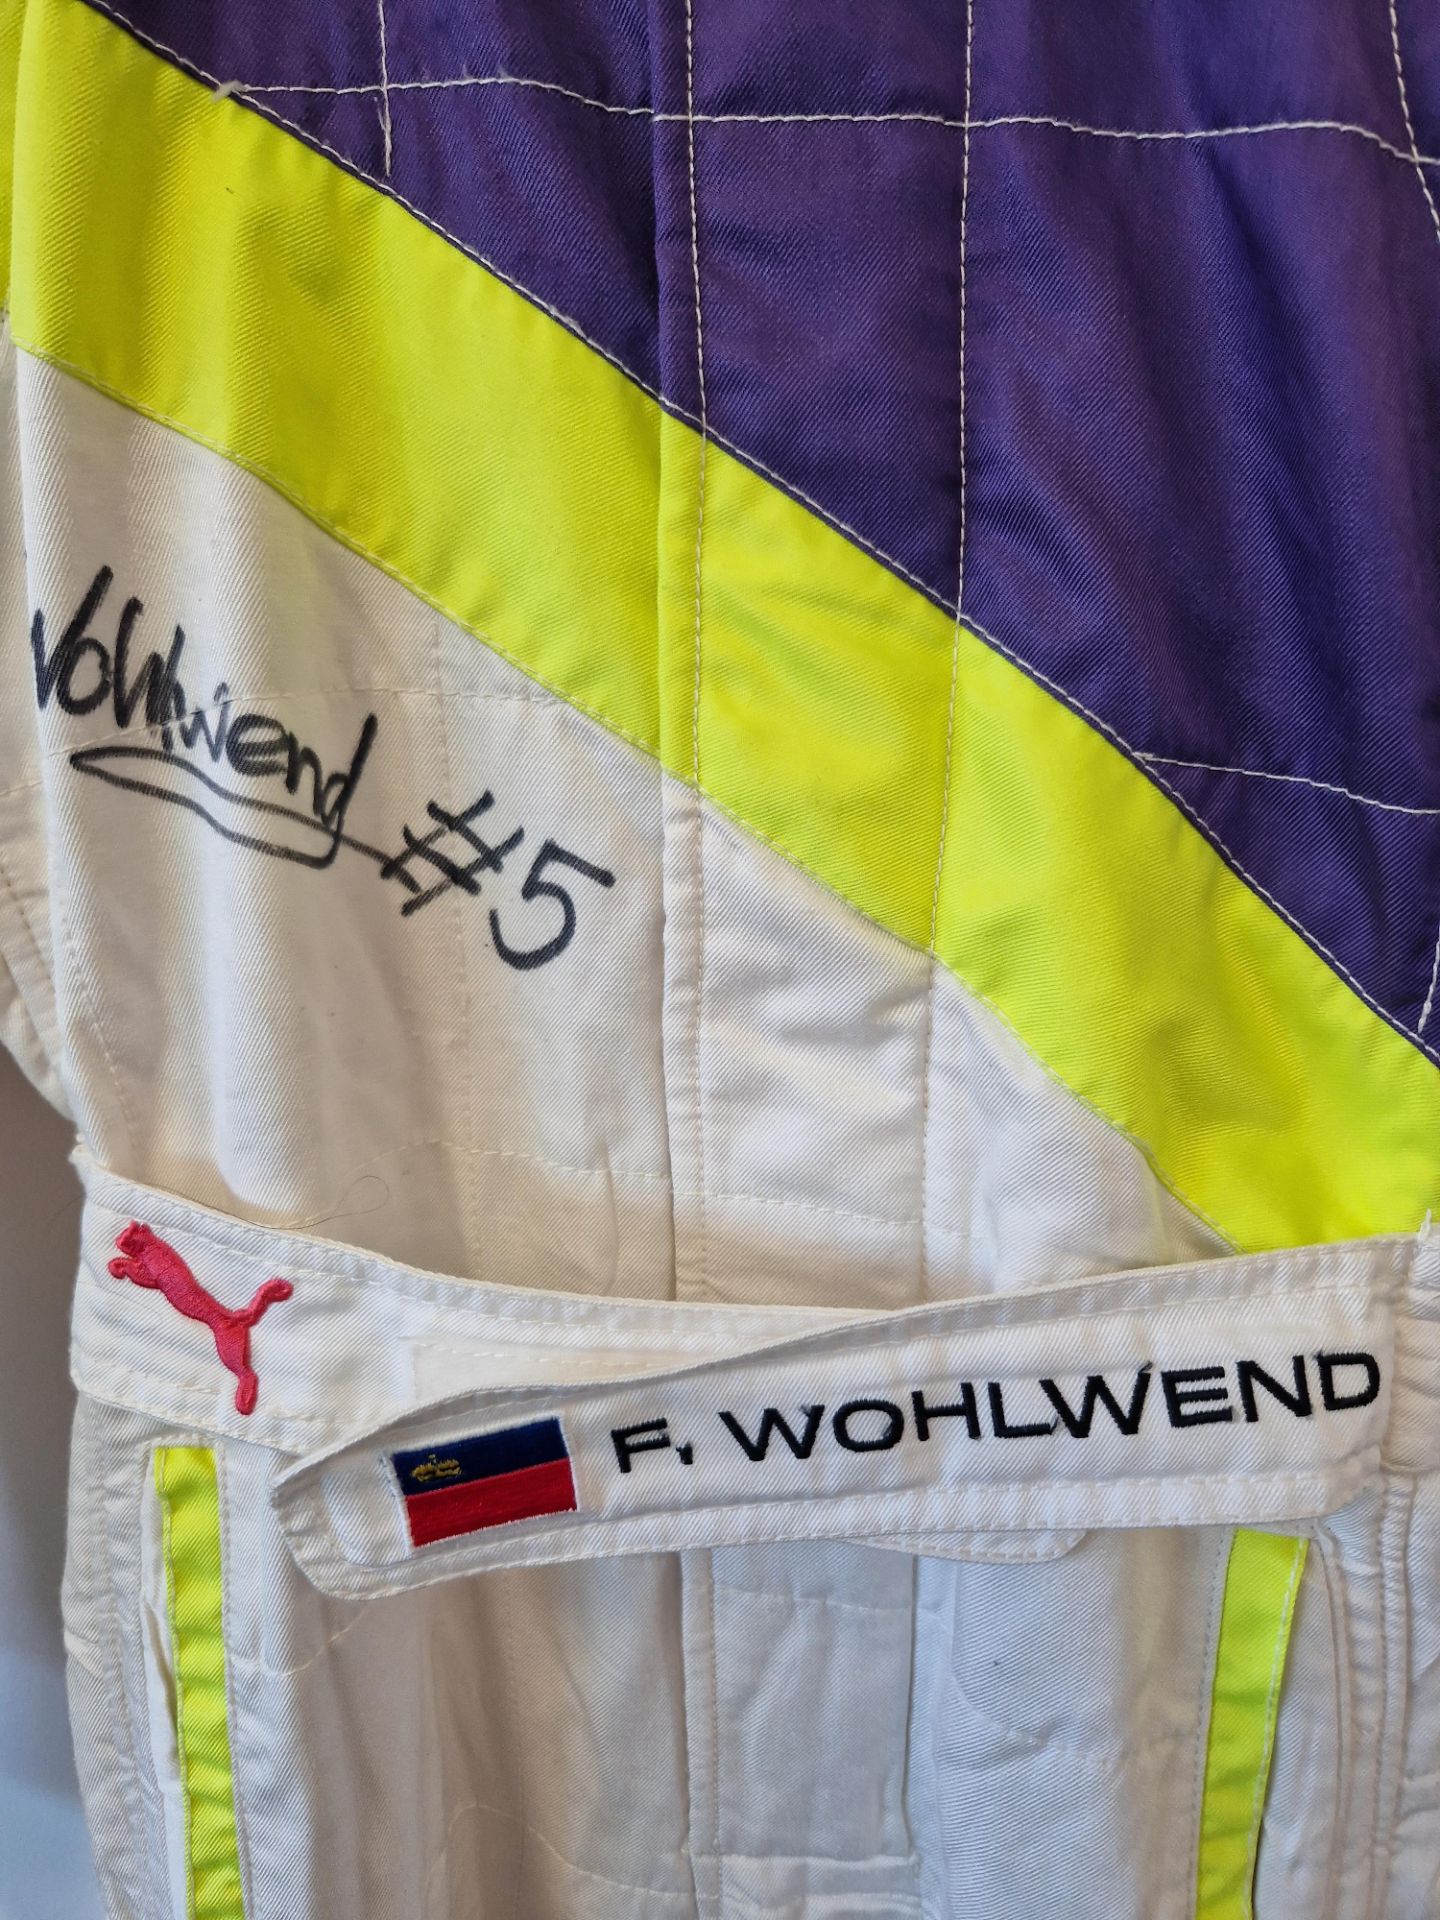 One PUMA FIA approved Race Suit (Size - Made to Measure) worn by Fabienne Wohlwend and signed by her - Bild 2 aus 2